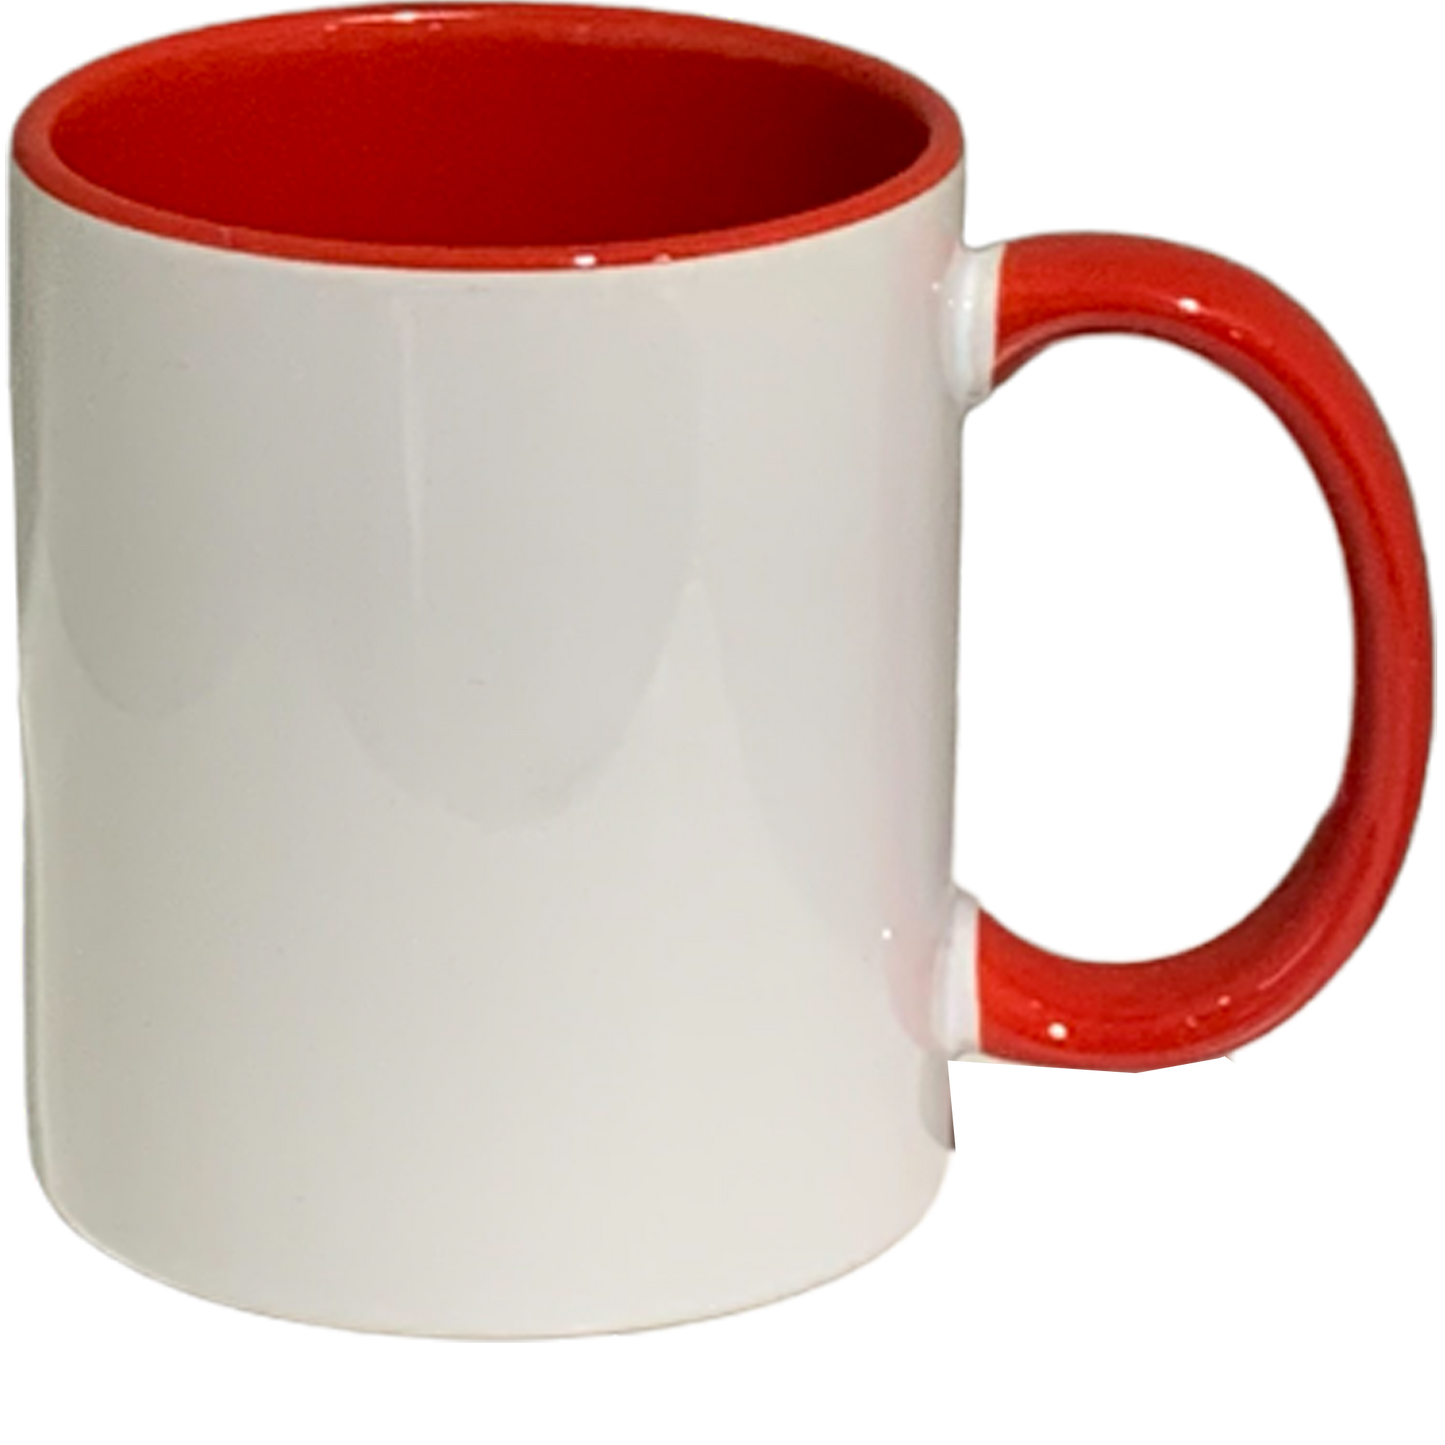 24 Pack-11 once White sublimation mugs inner color RED and handle with reinforced foam box packaging